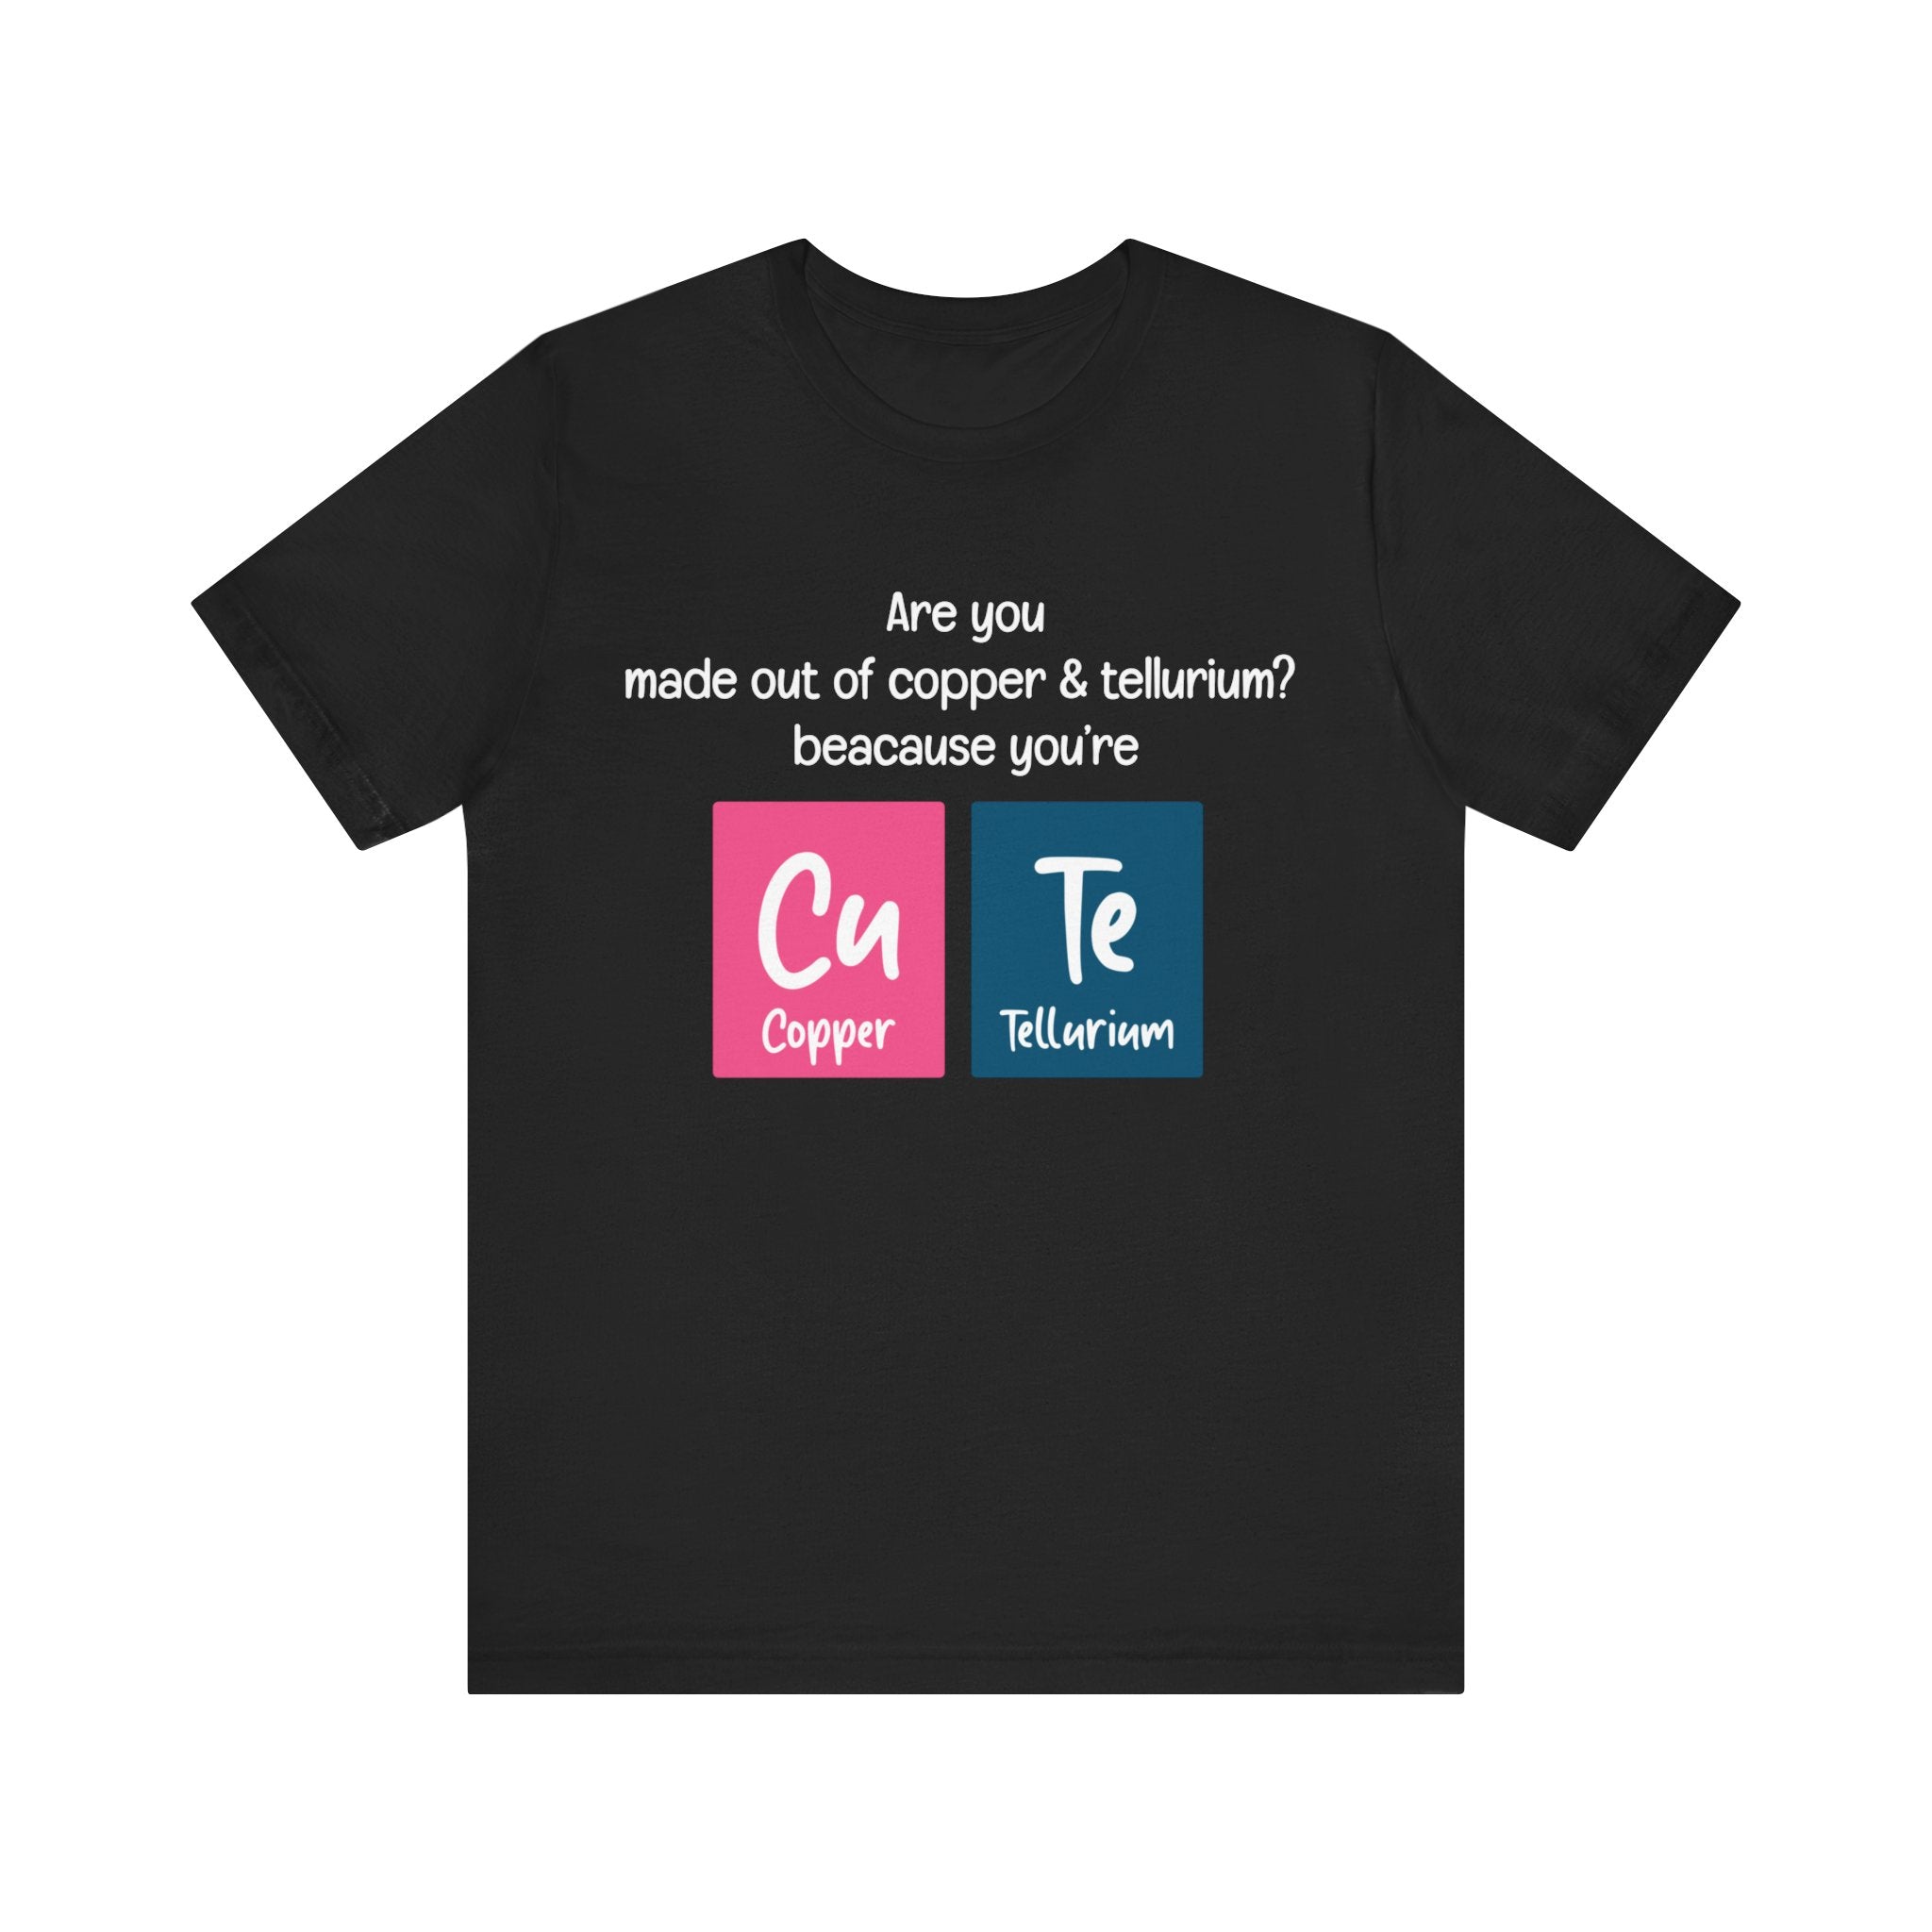 This black Cu-Te - T-Shirt features the text "Are you made out of copper & tellurium? because you're Cu Te" along with periodic table symbols for Copper (Cu) and Tellurium (Te). Made from soft Airlume combed and ring-spun cotton, it offers both comfort and a clever twist for science lovers.